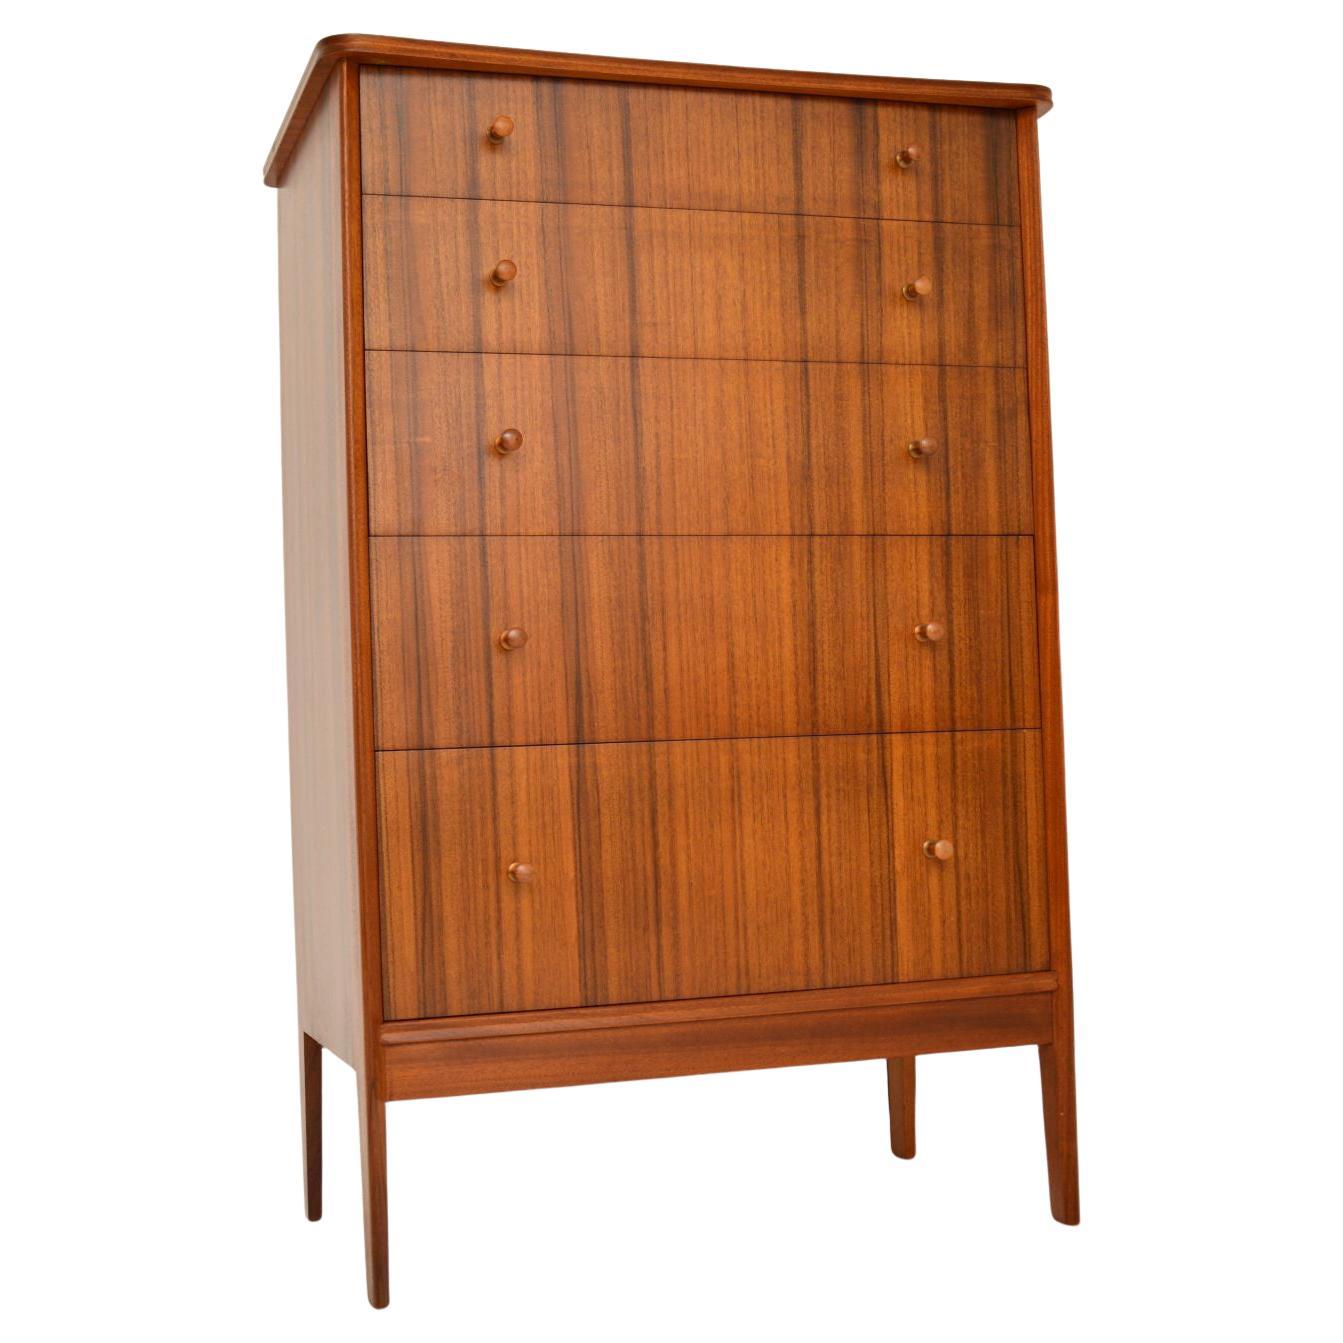 1950's Vintage Walnut Chest of Drawers by Peter Hayward for Vanson